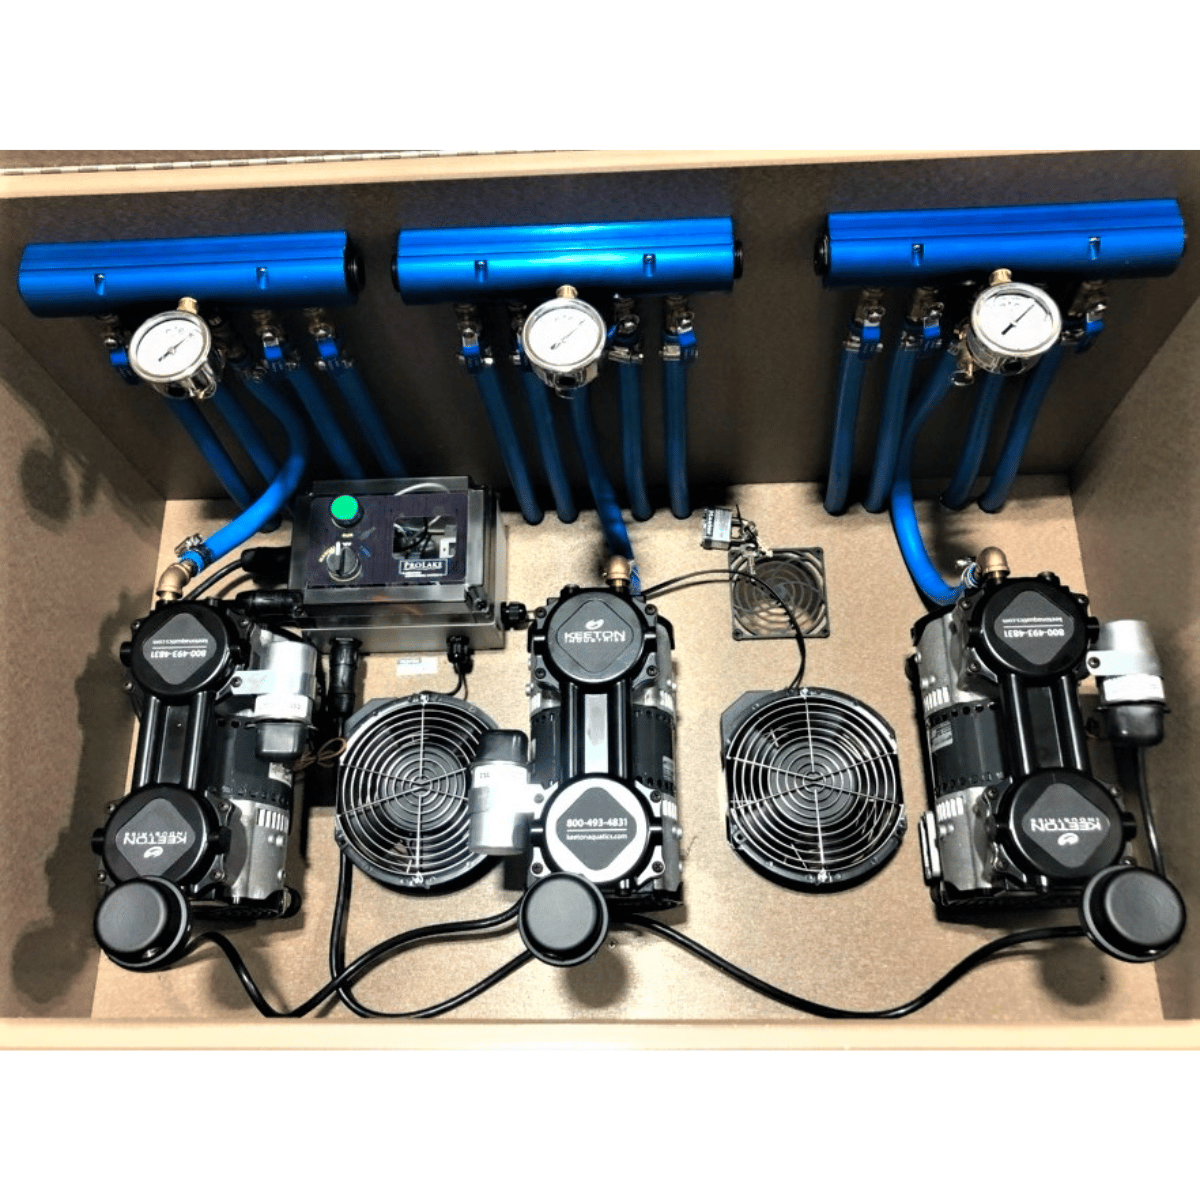 PROLAKE 3.11 Aeration System - Cabinet Internal View with the Compressor